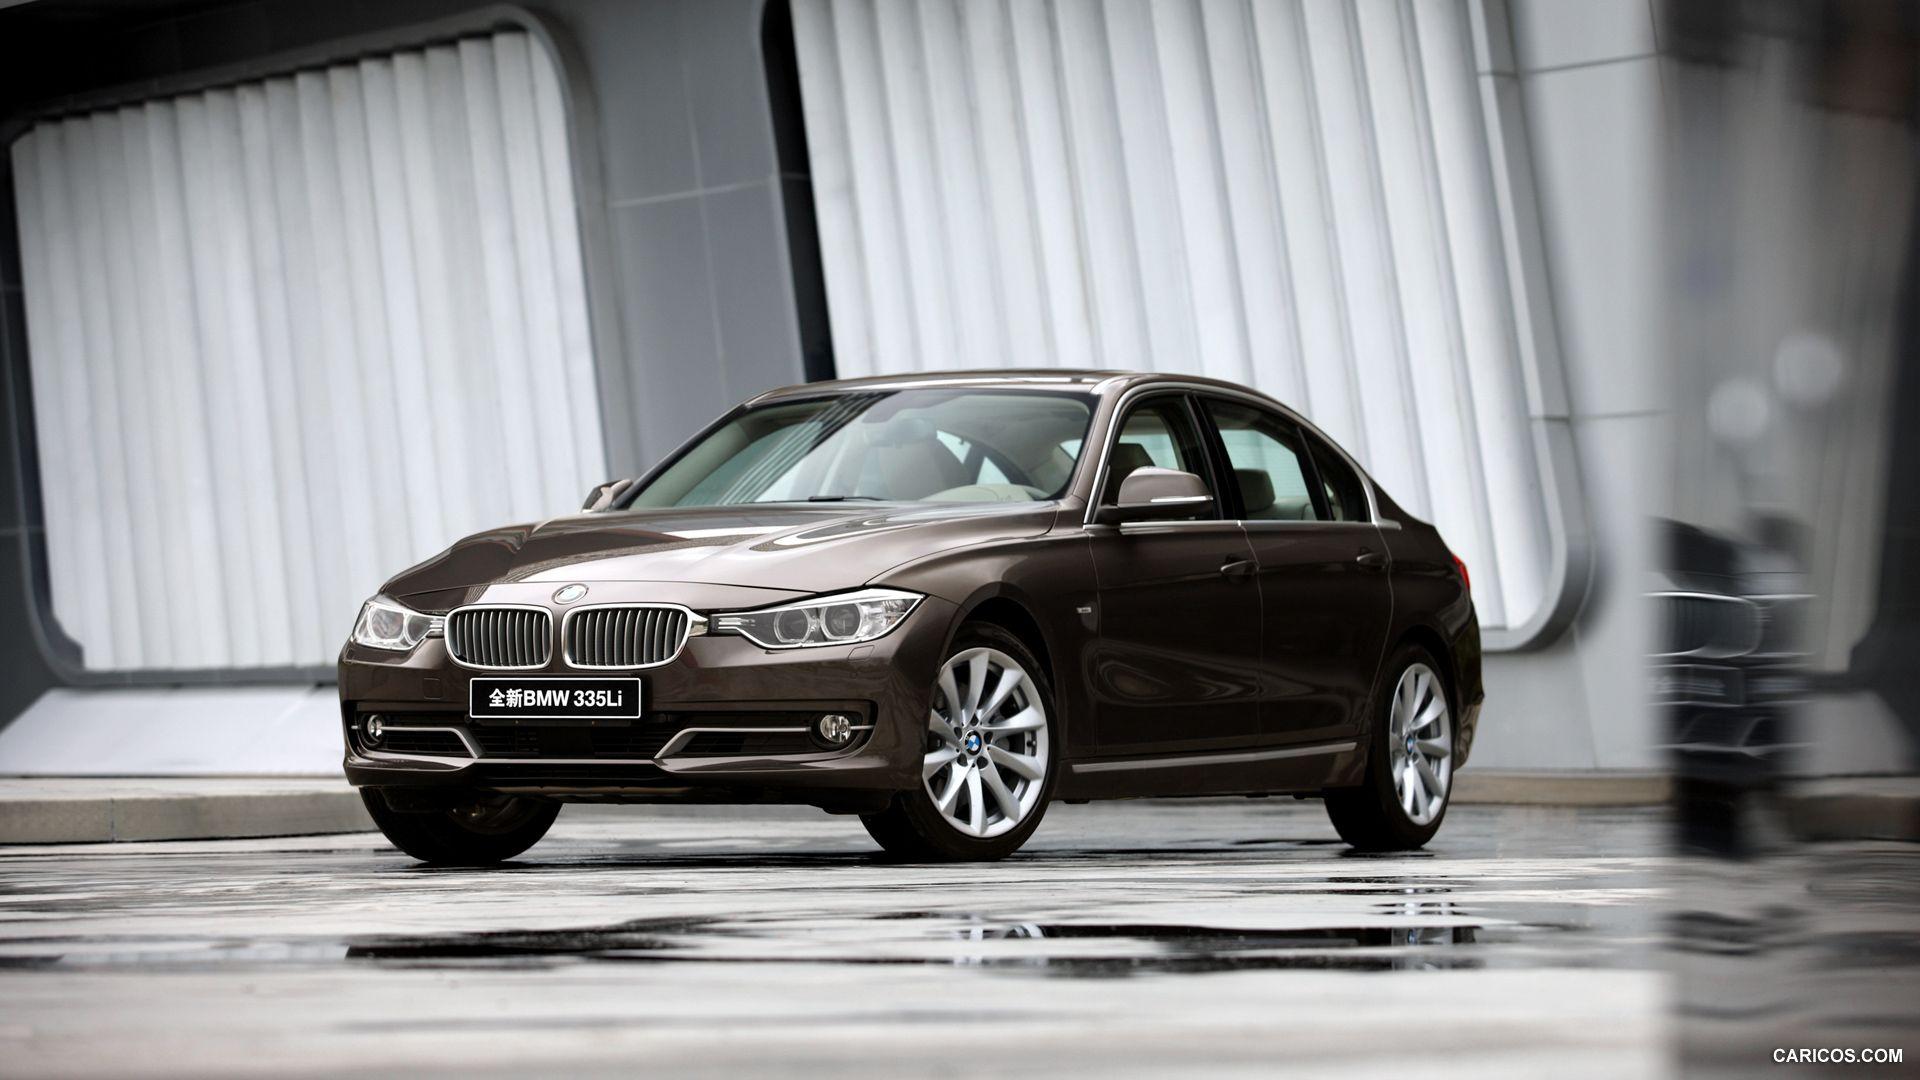 bmw 3 series wallpaper Collection